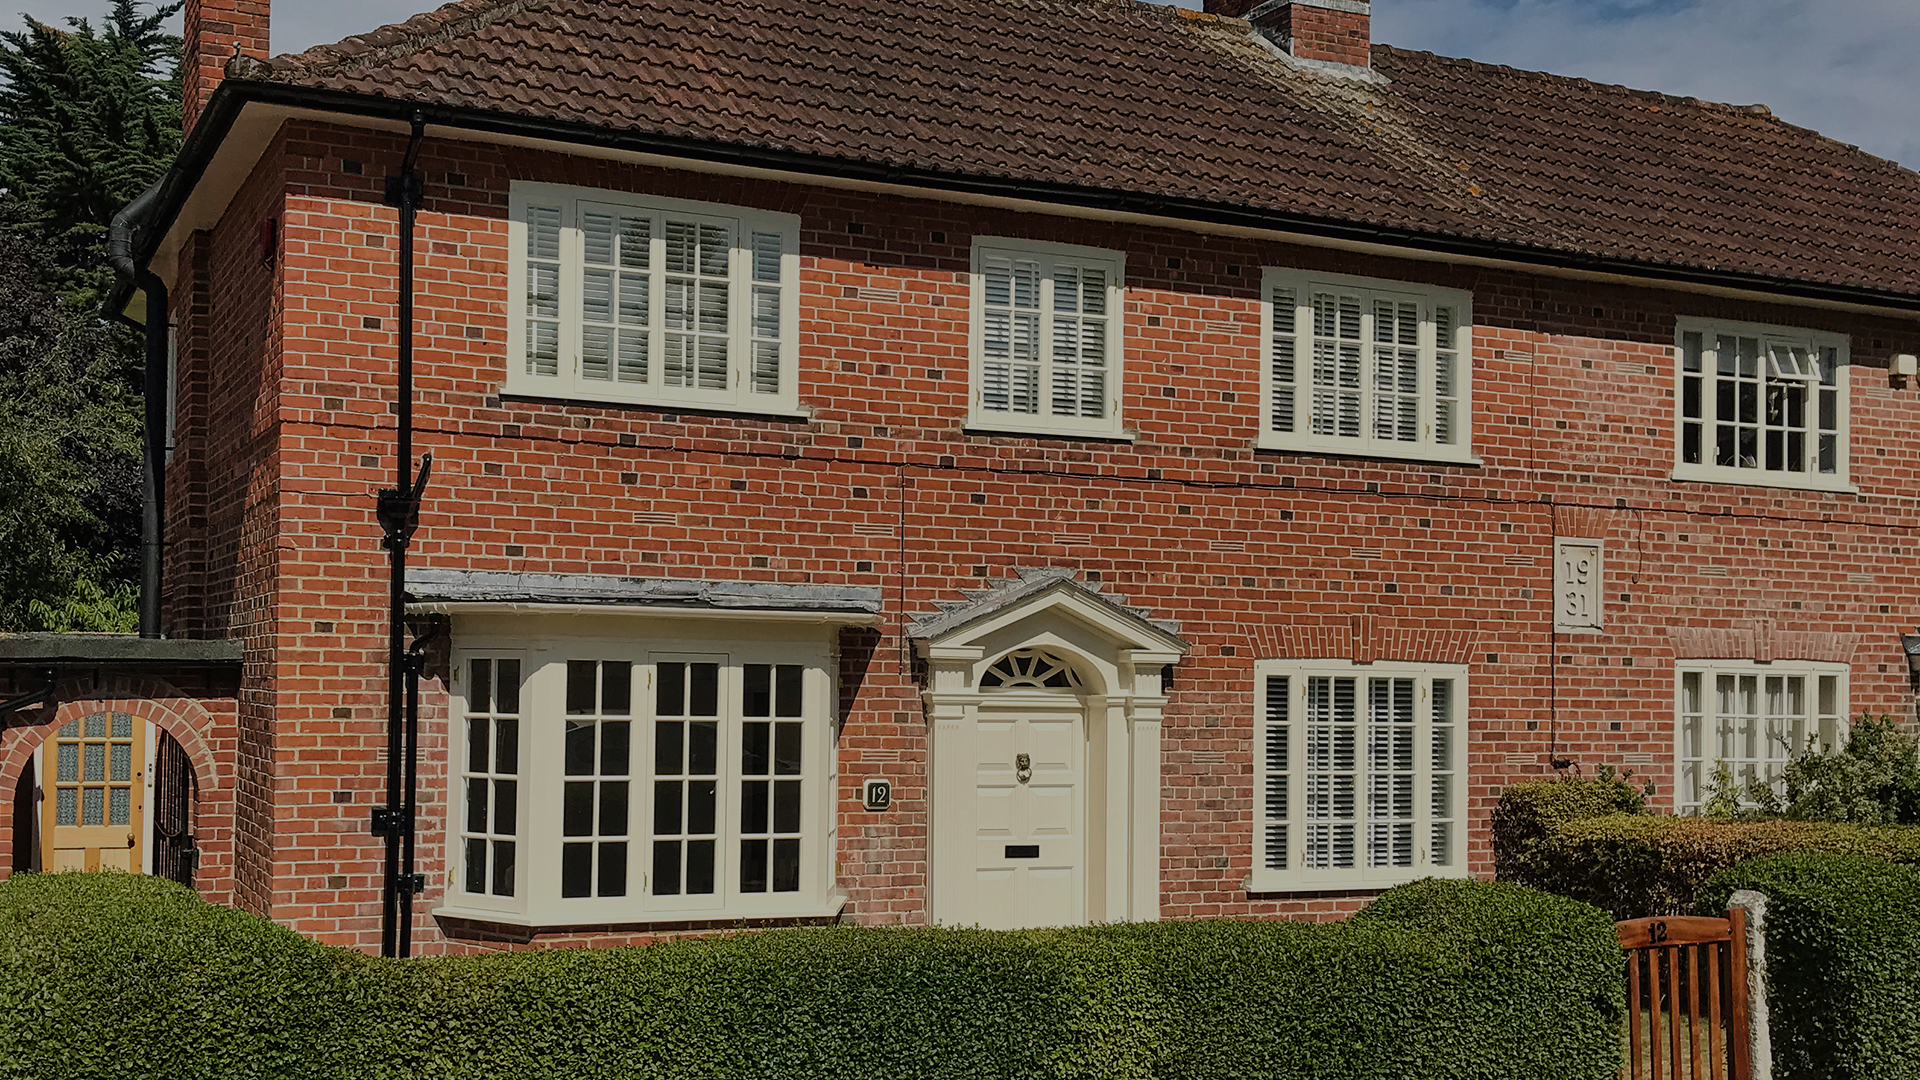 Casement Windows by Bowden Tailored Wood - Specialist Heritage Joinery | Box Sash & Casement Windows